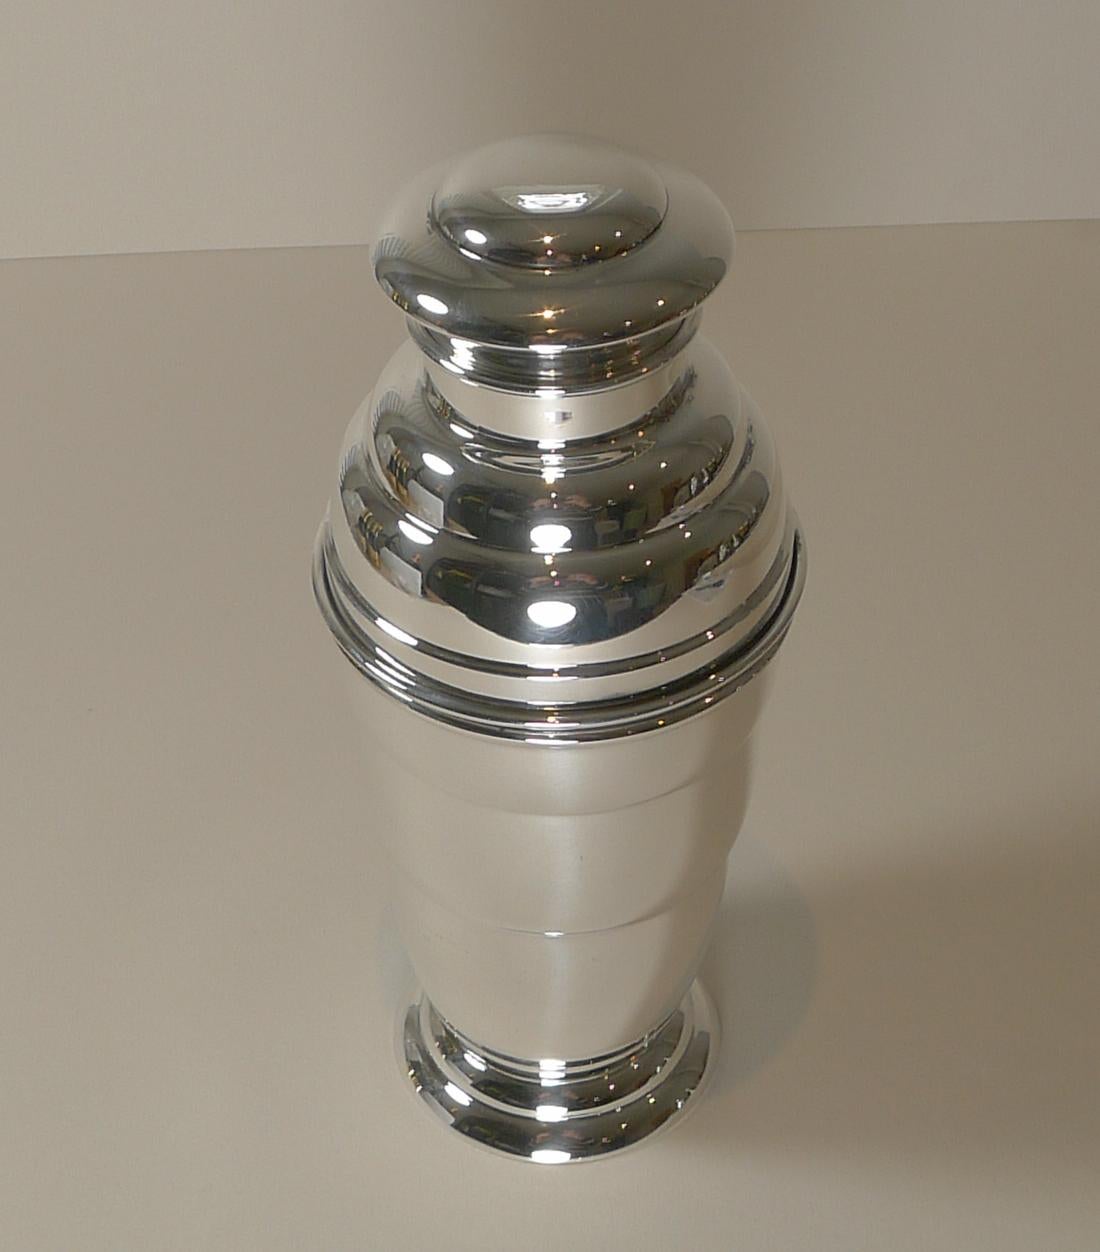 English Art Deco Cocktail Shaker c.1930, Silver Plate 8